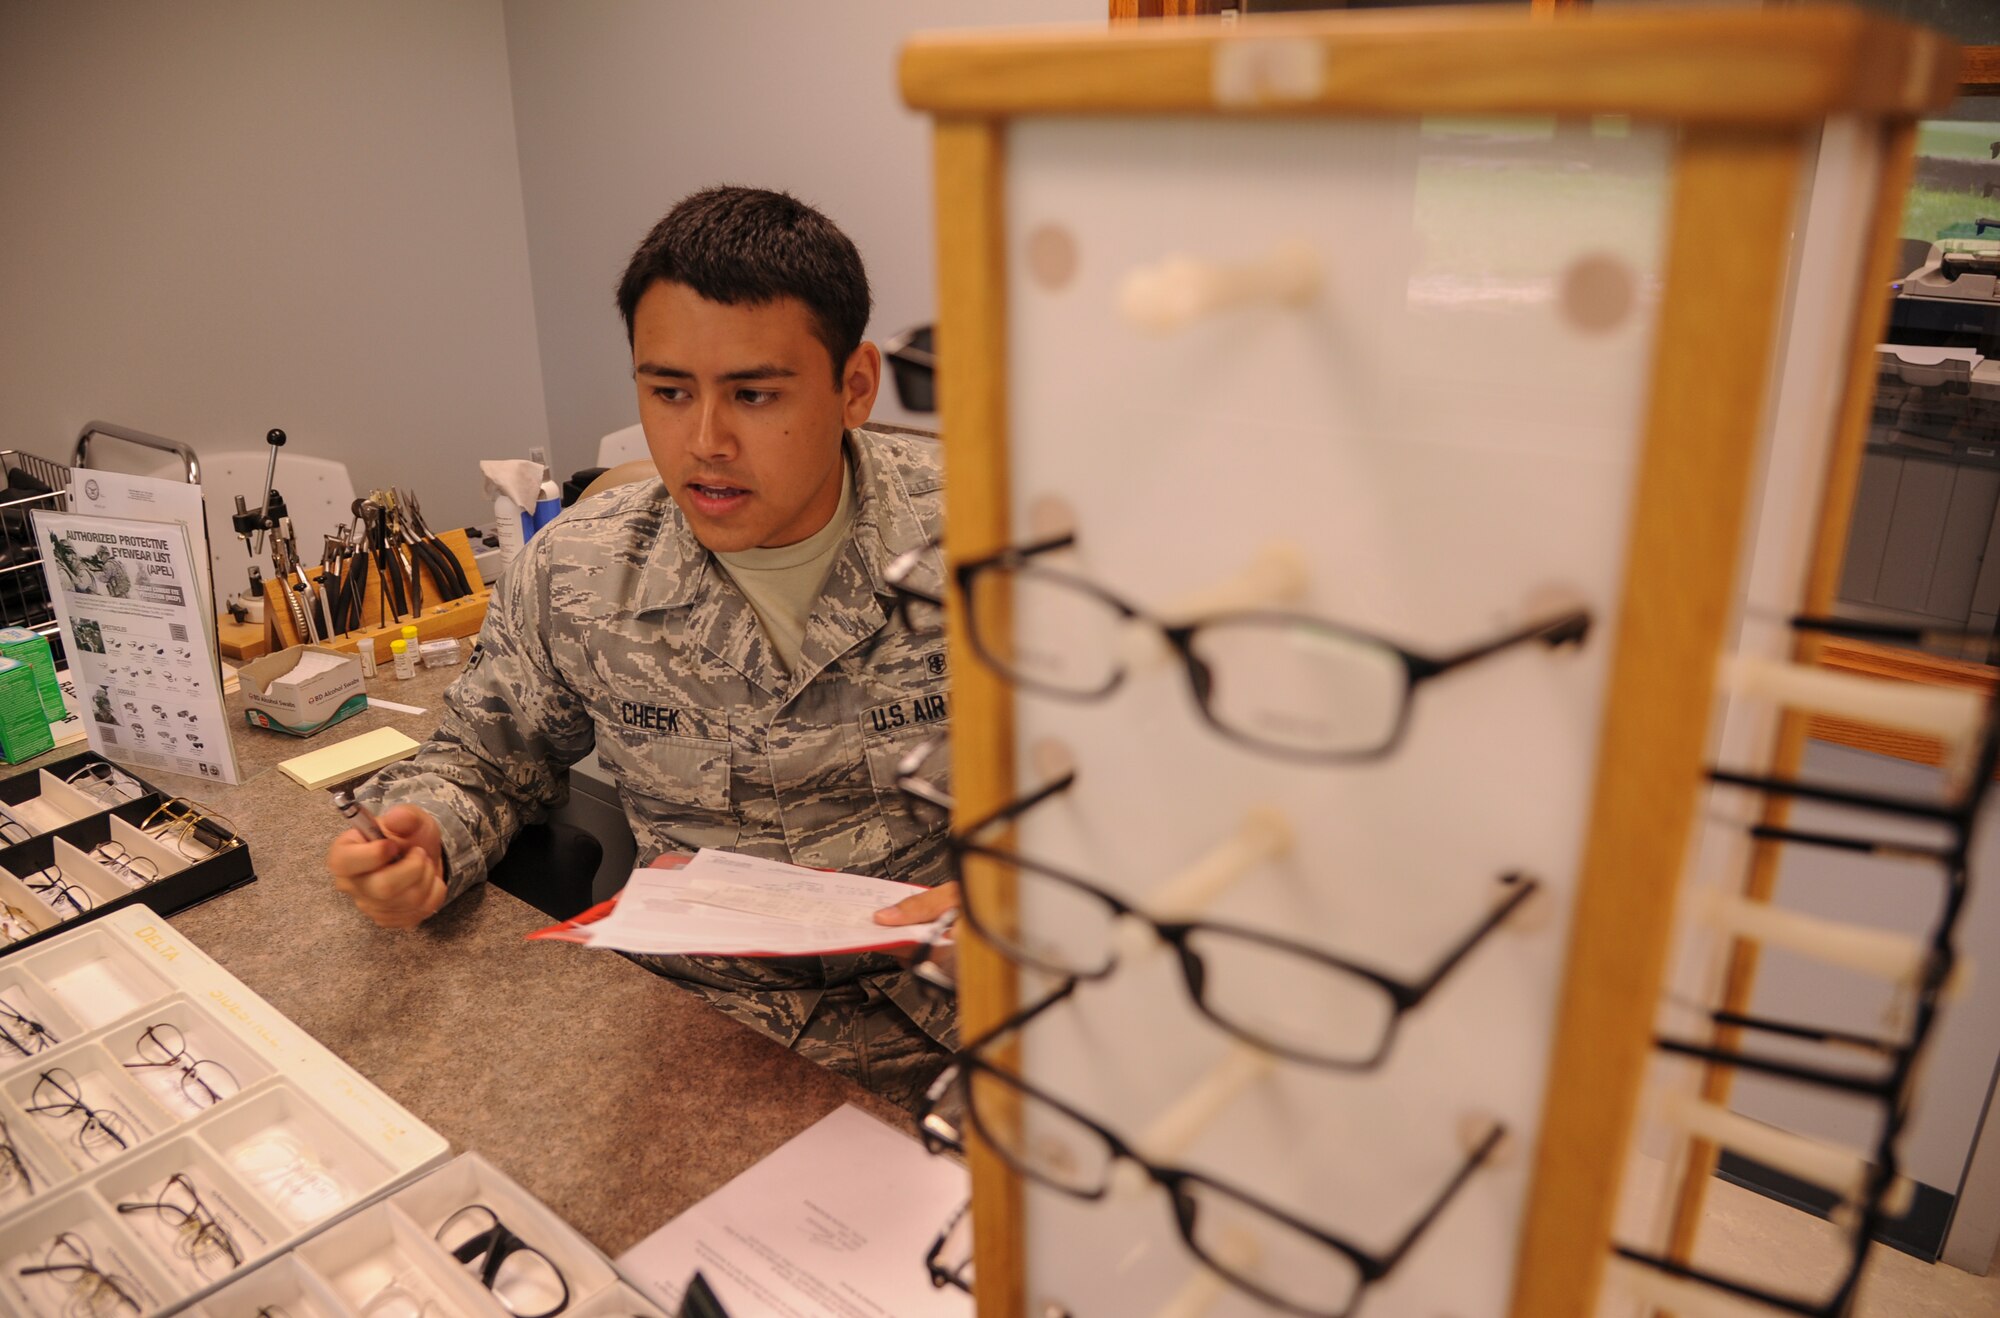 Airman 1st Class Eli Cheek, a 19th Aerospace Medicine Squadron optometry technician, discusses frame options with a patient June 30, 2014, at Little Rock Air Force Base, Ark. Providing glasses is just one of the many services that the optometry clinic offers. (U.S. Air Force photo by Airman 1st Class Harry Brexel)